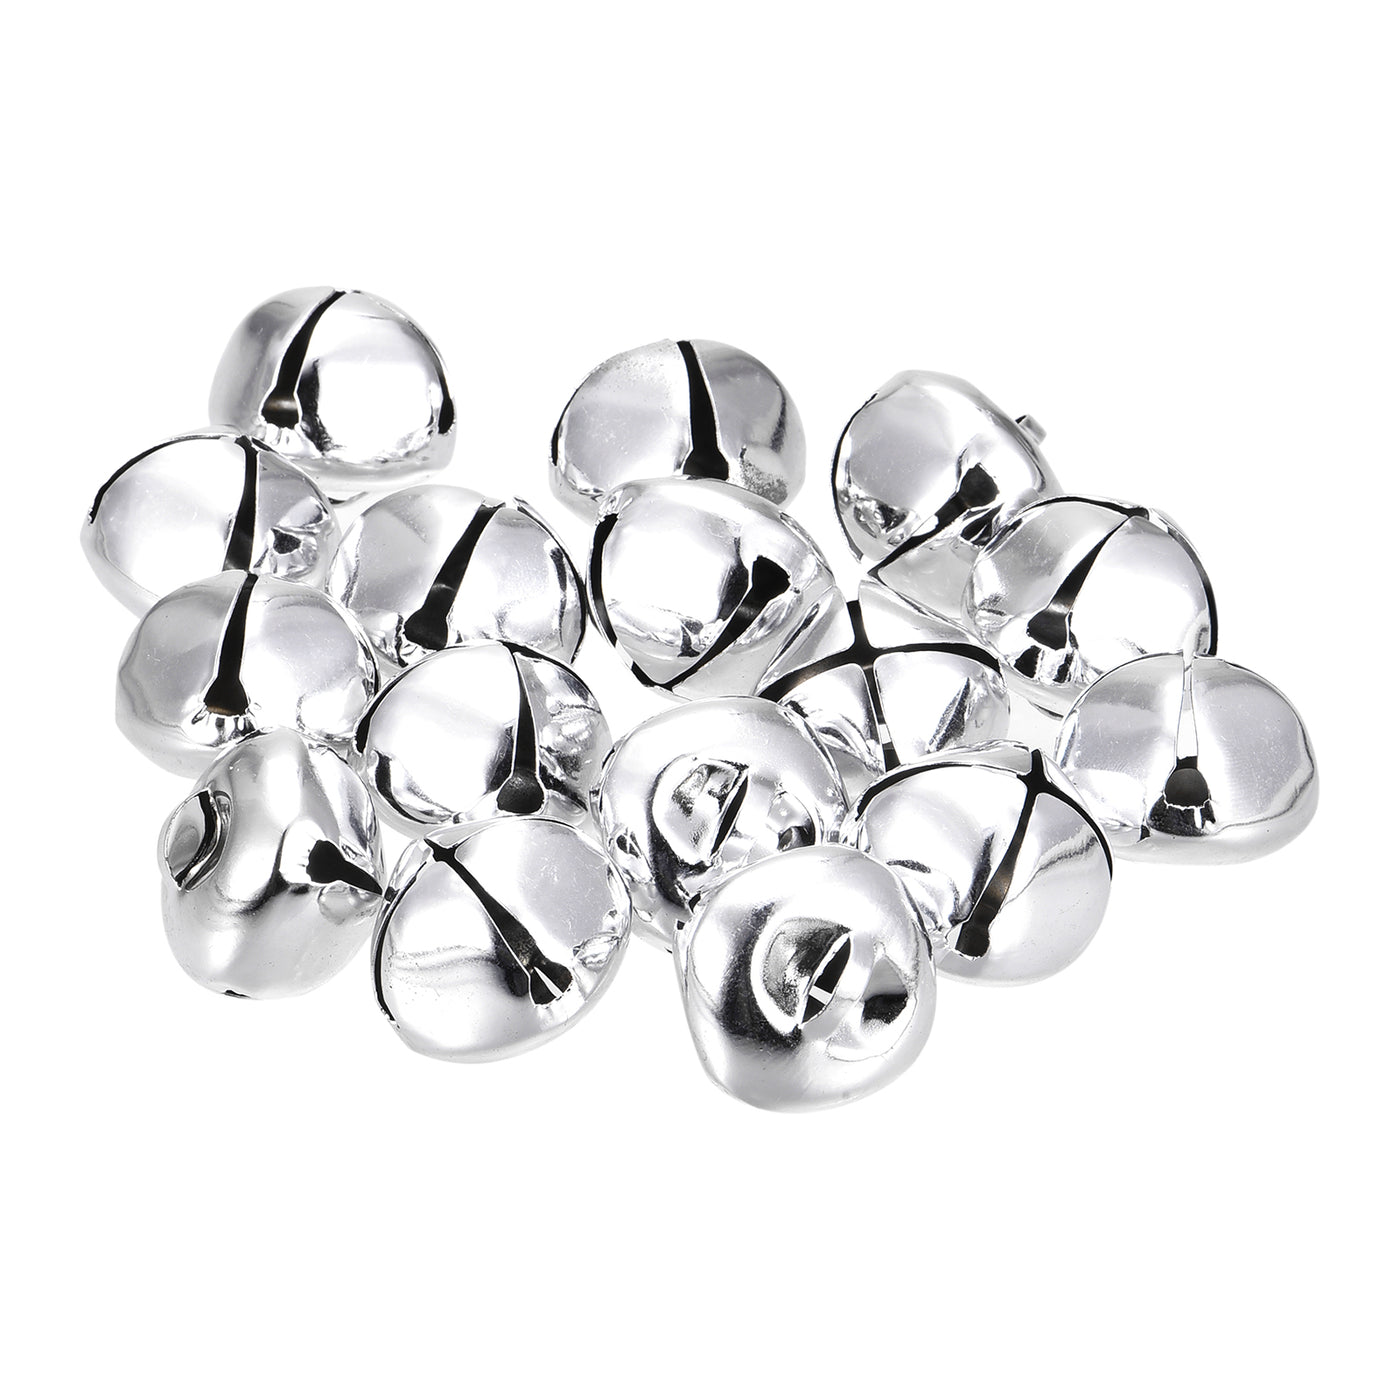 uxcell Uxcell Jingle Bells, 25mm 80pcs Small Bells for Crafts DIY Christmas, Silver Tone